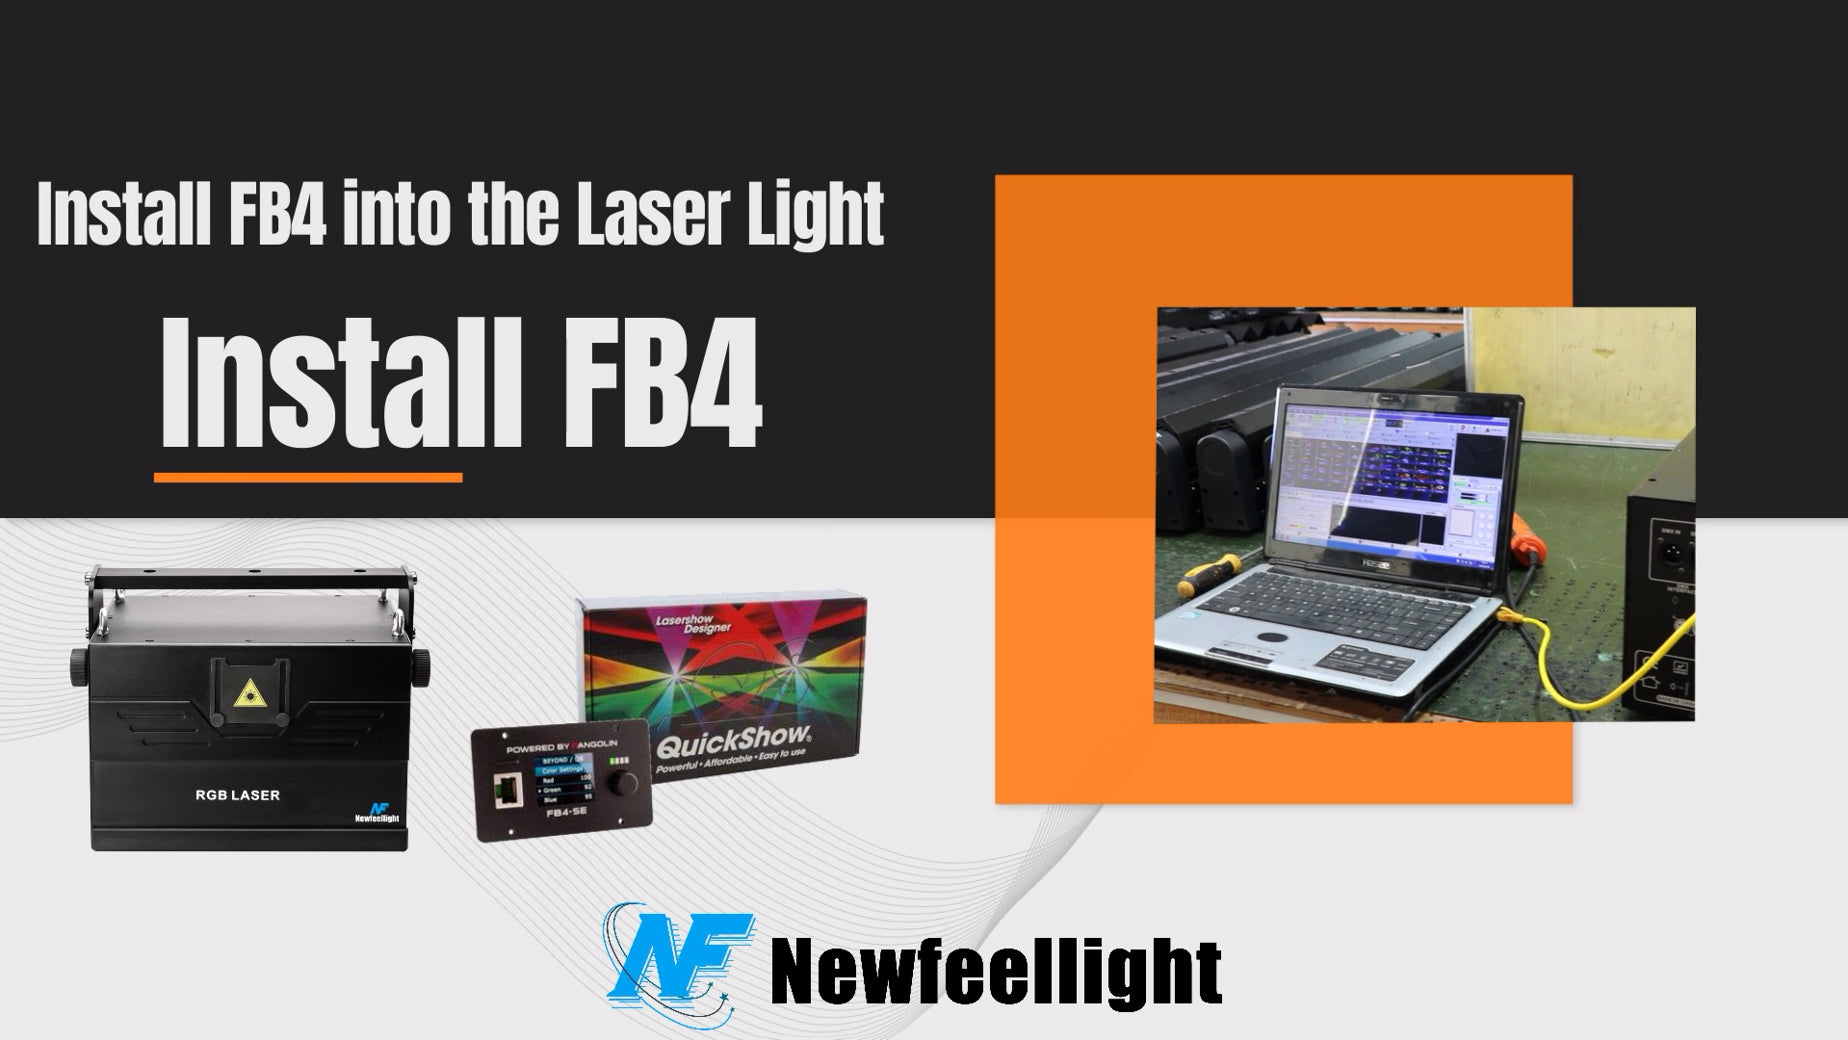 What are the functions of the laser lights software?